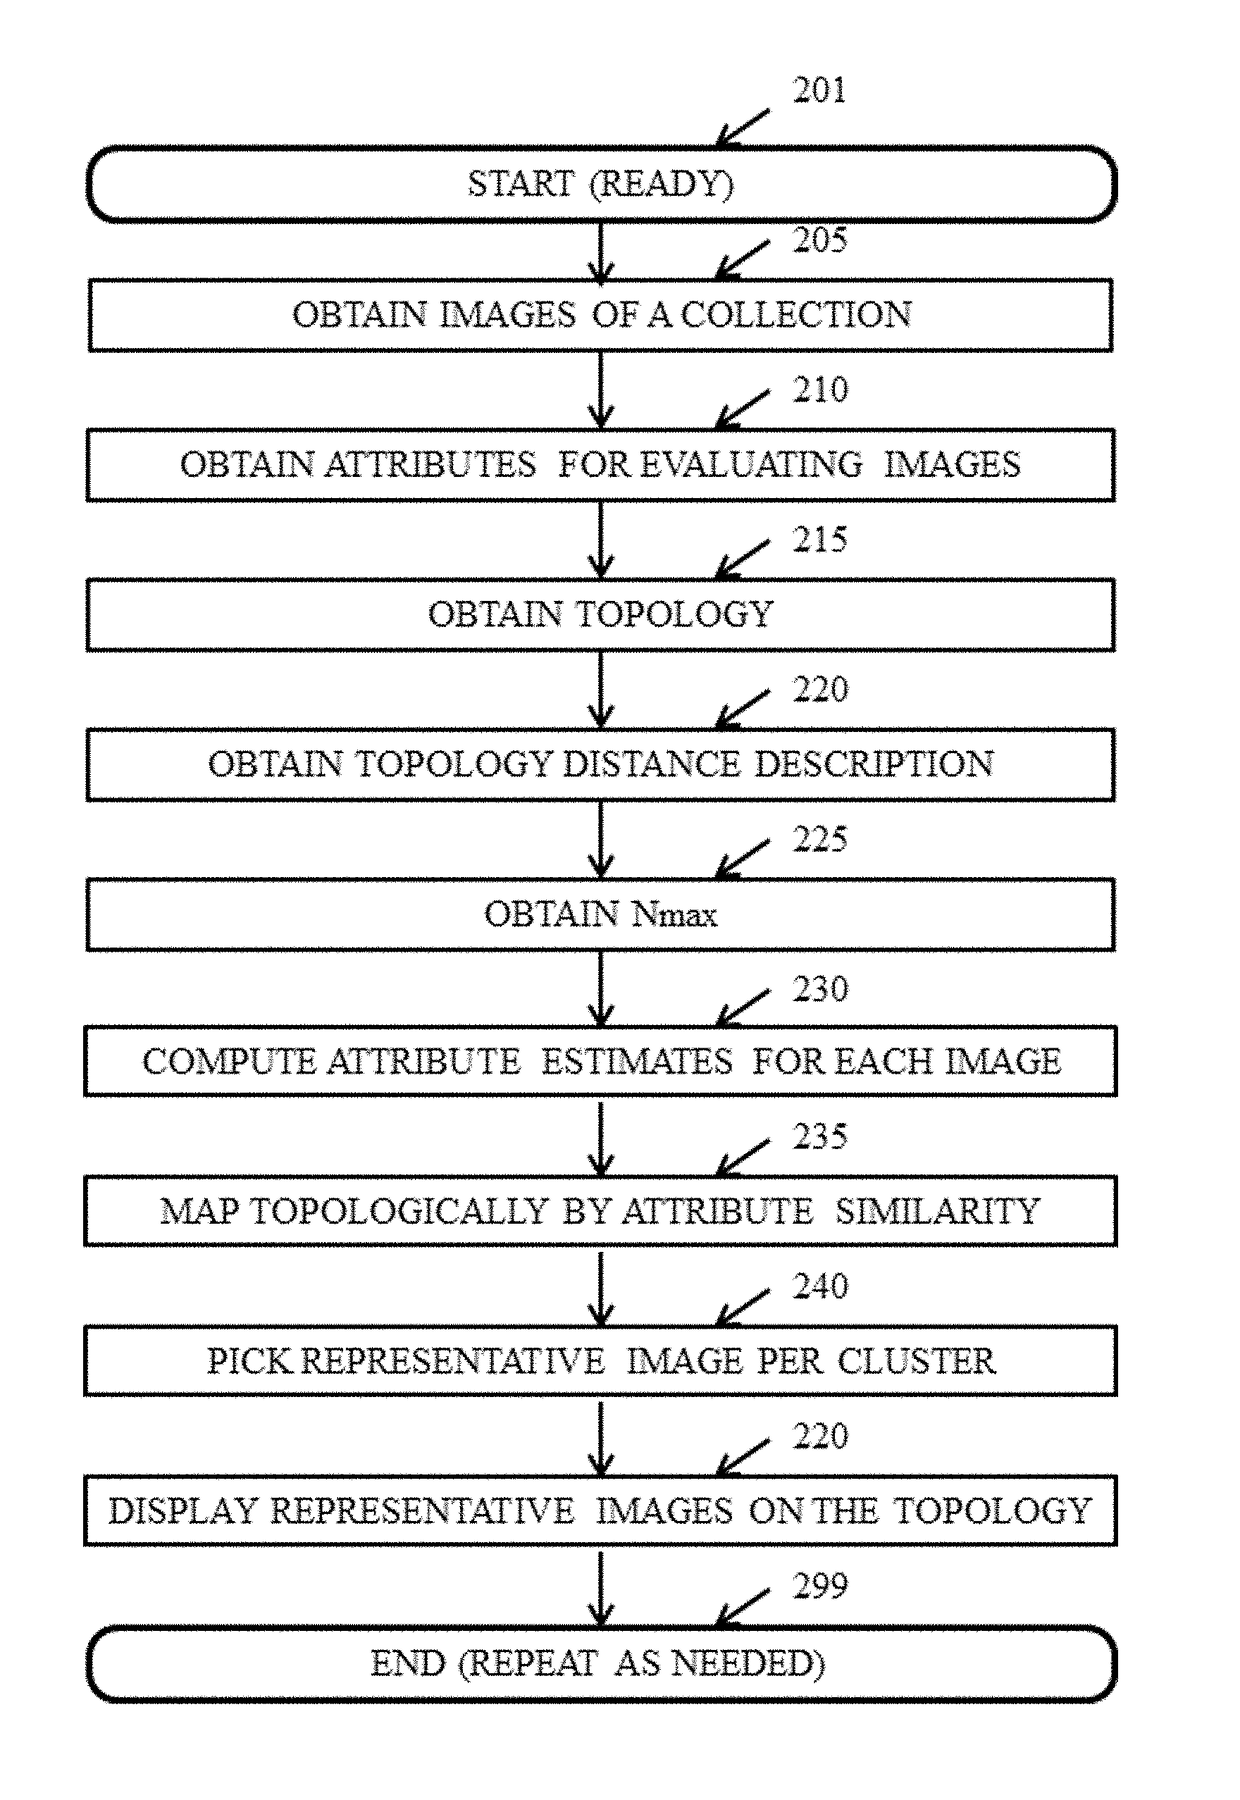 Spatial organization of images based on emotion face clouds